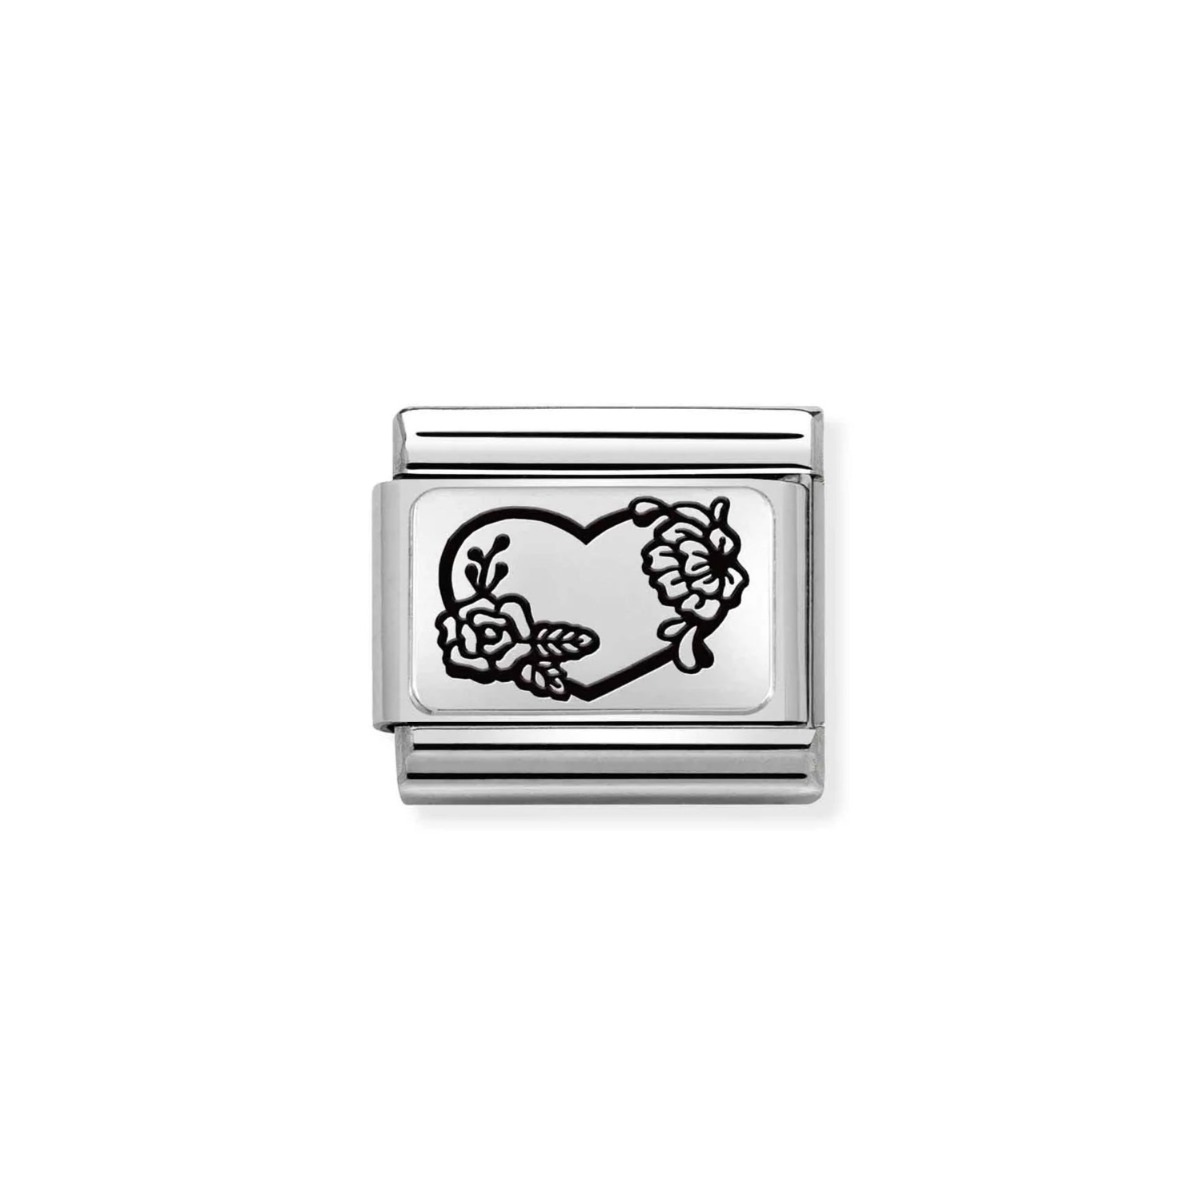 Nomination Classic Flowers Charm - Sterling Silver and Black Enamel Heart 330111_28